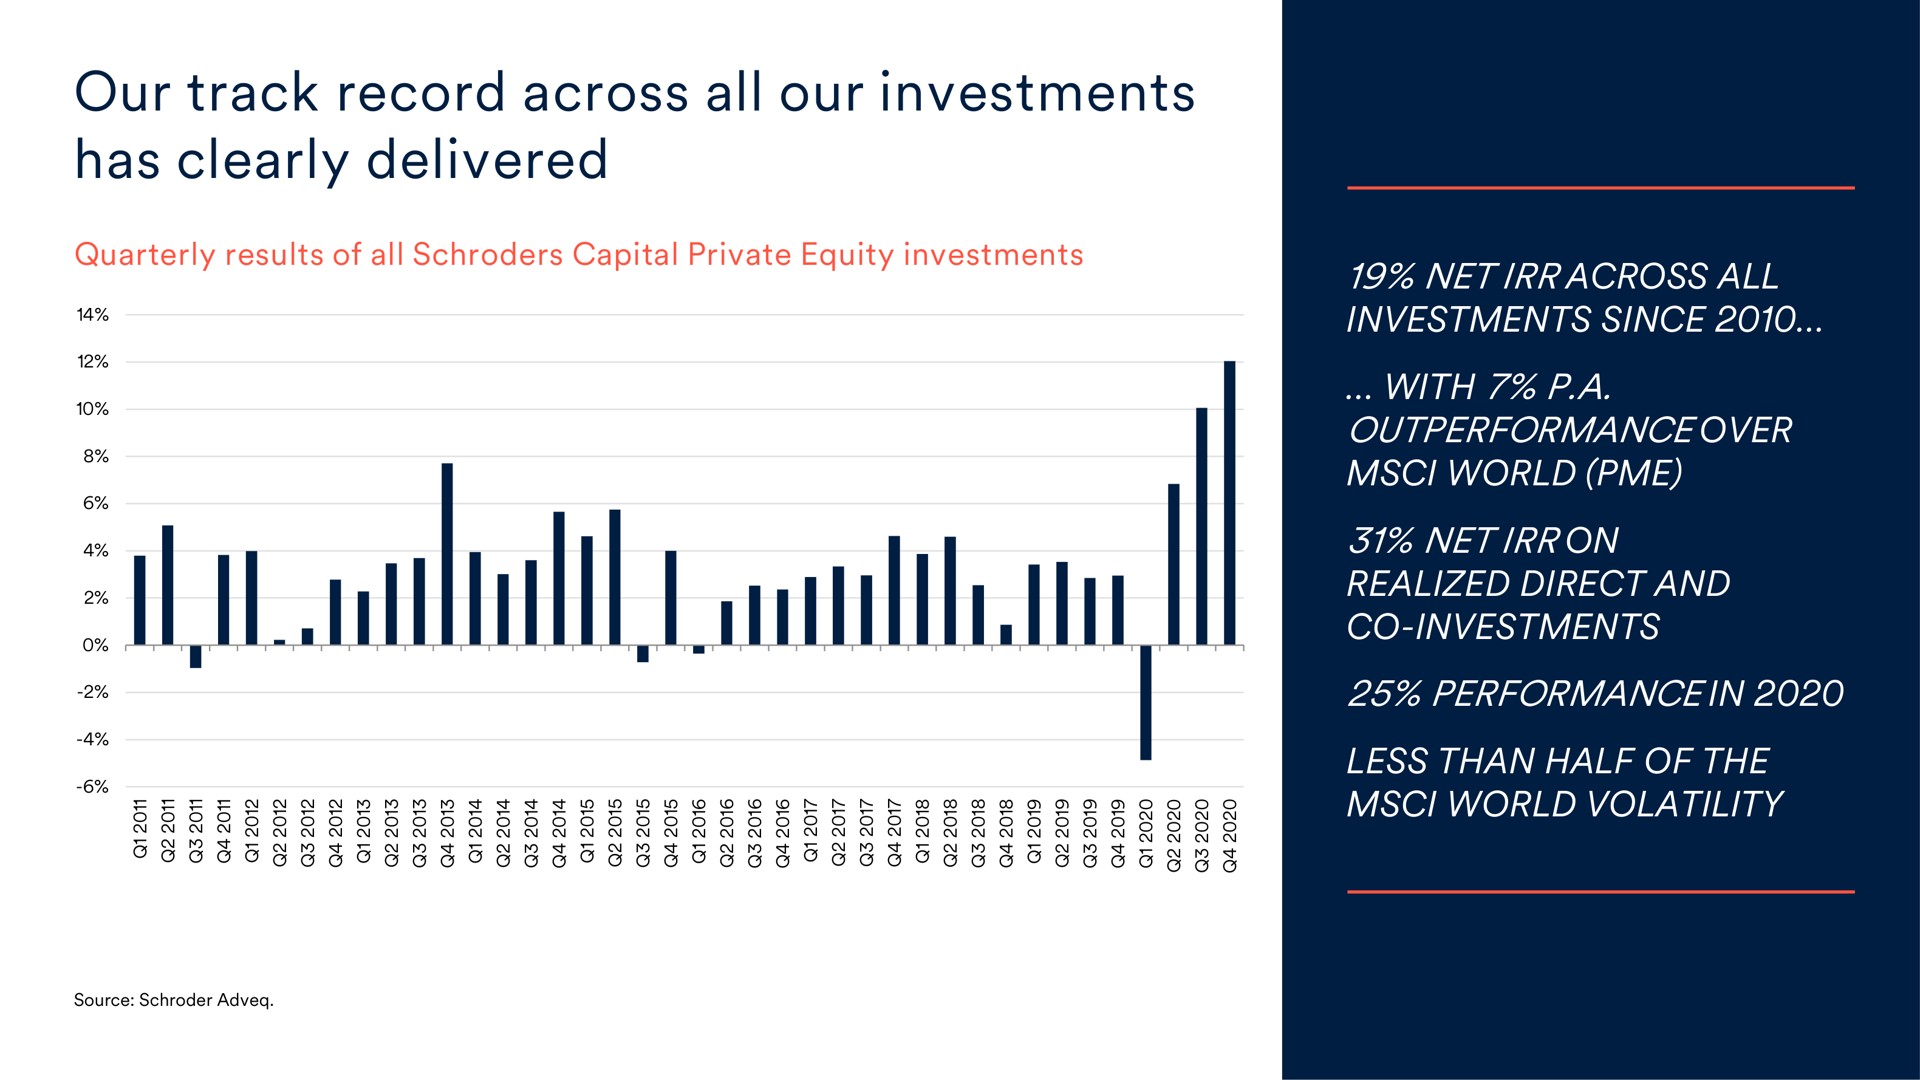 our track record across all our investments has clearly delivered a i realized direct and investments | Schroders